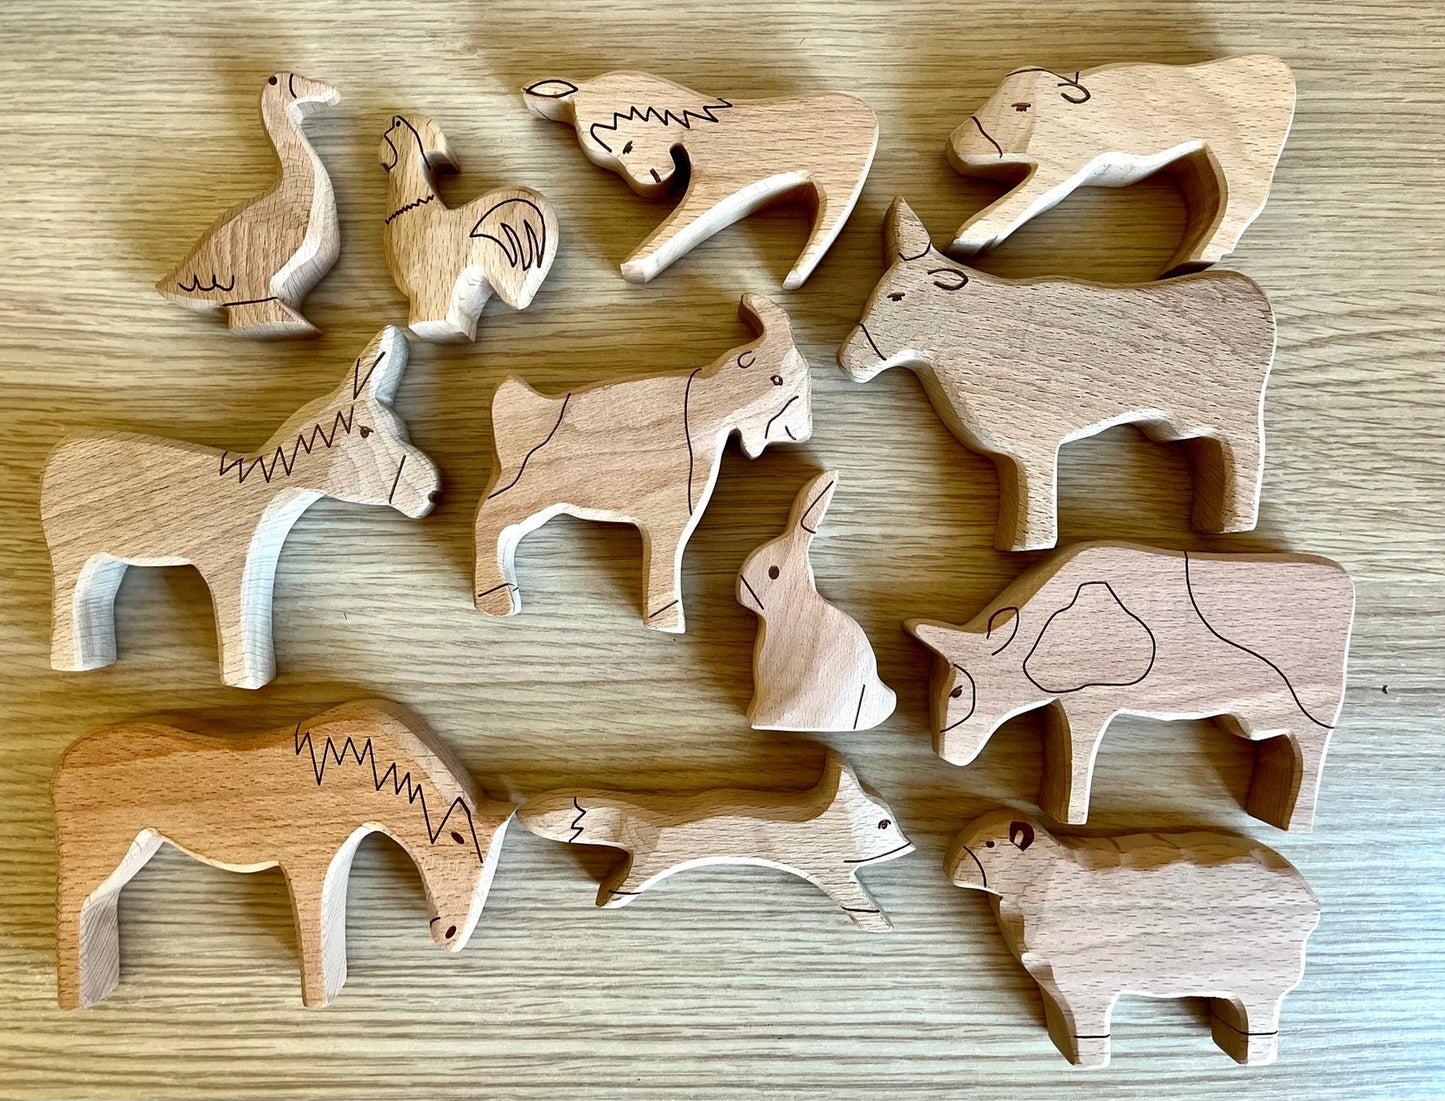 Wooden Animals - Bull, Cow or Calf